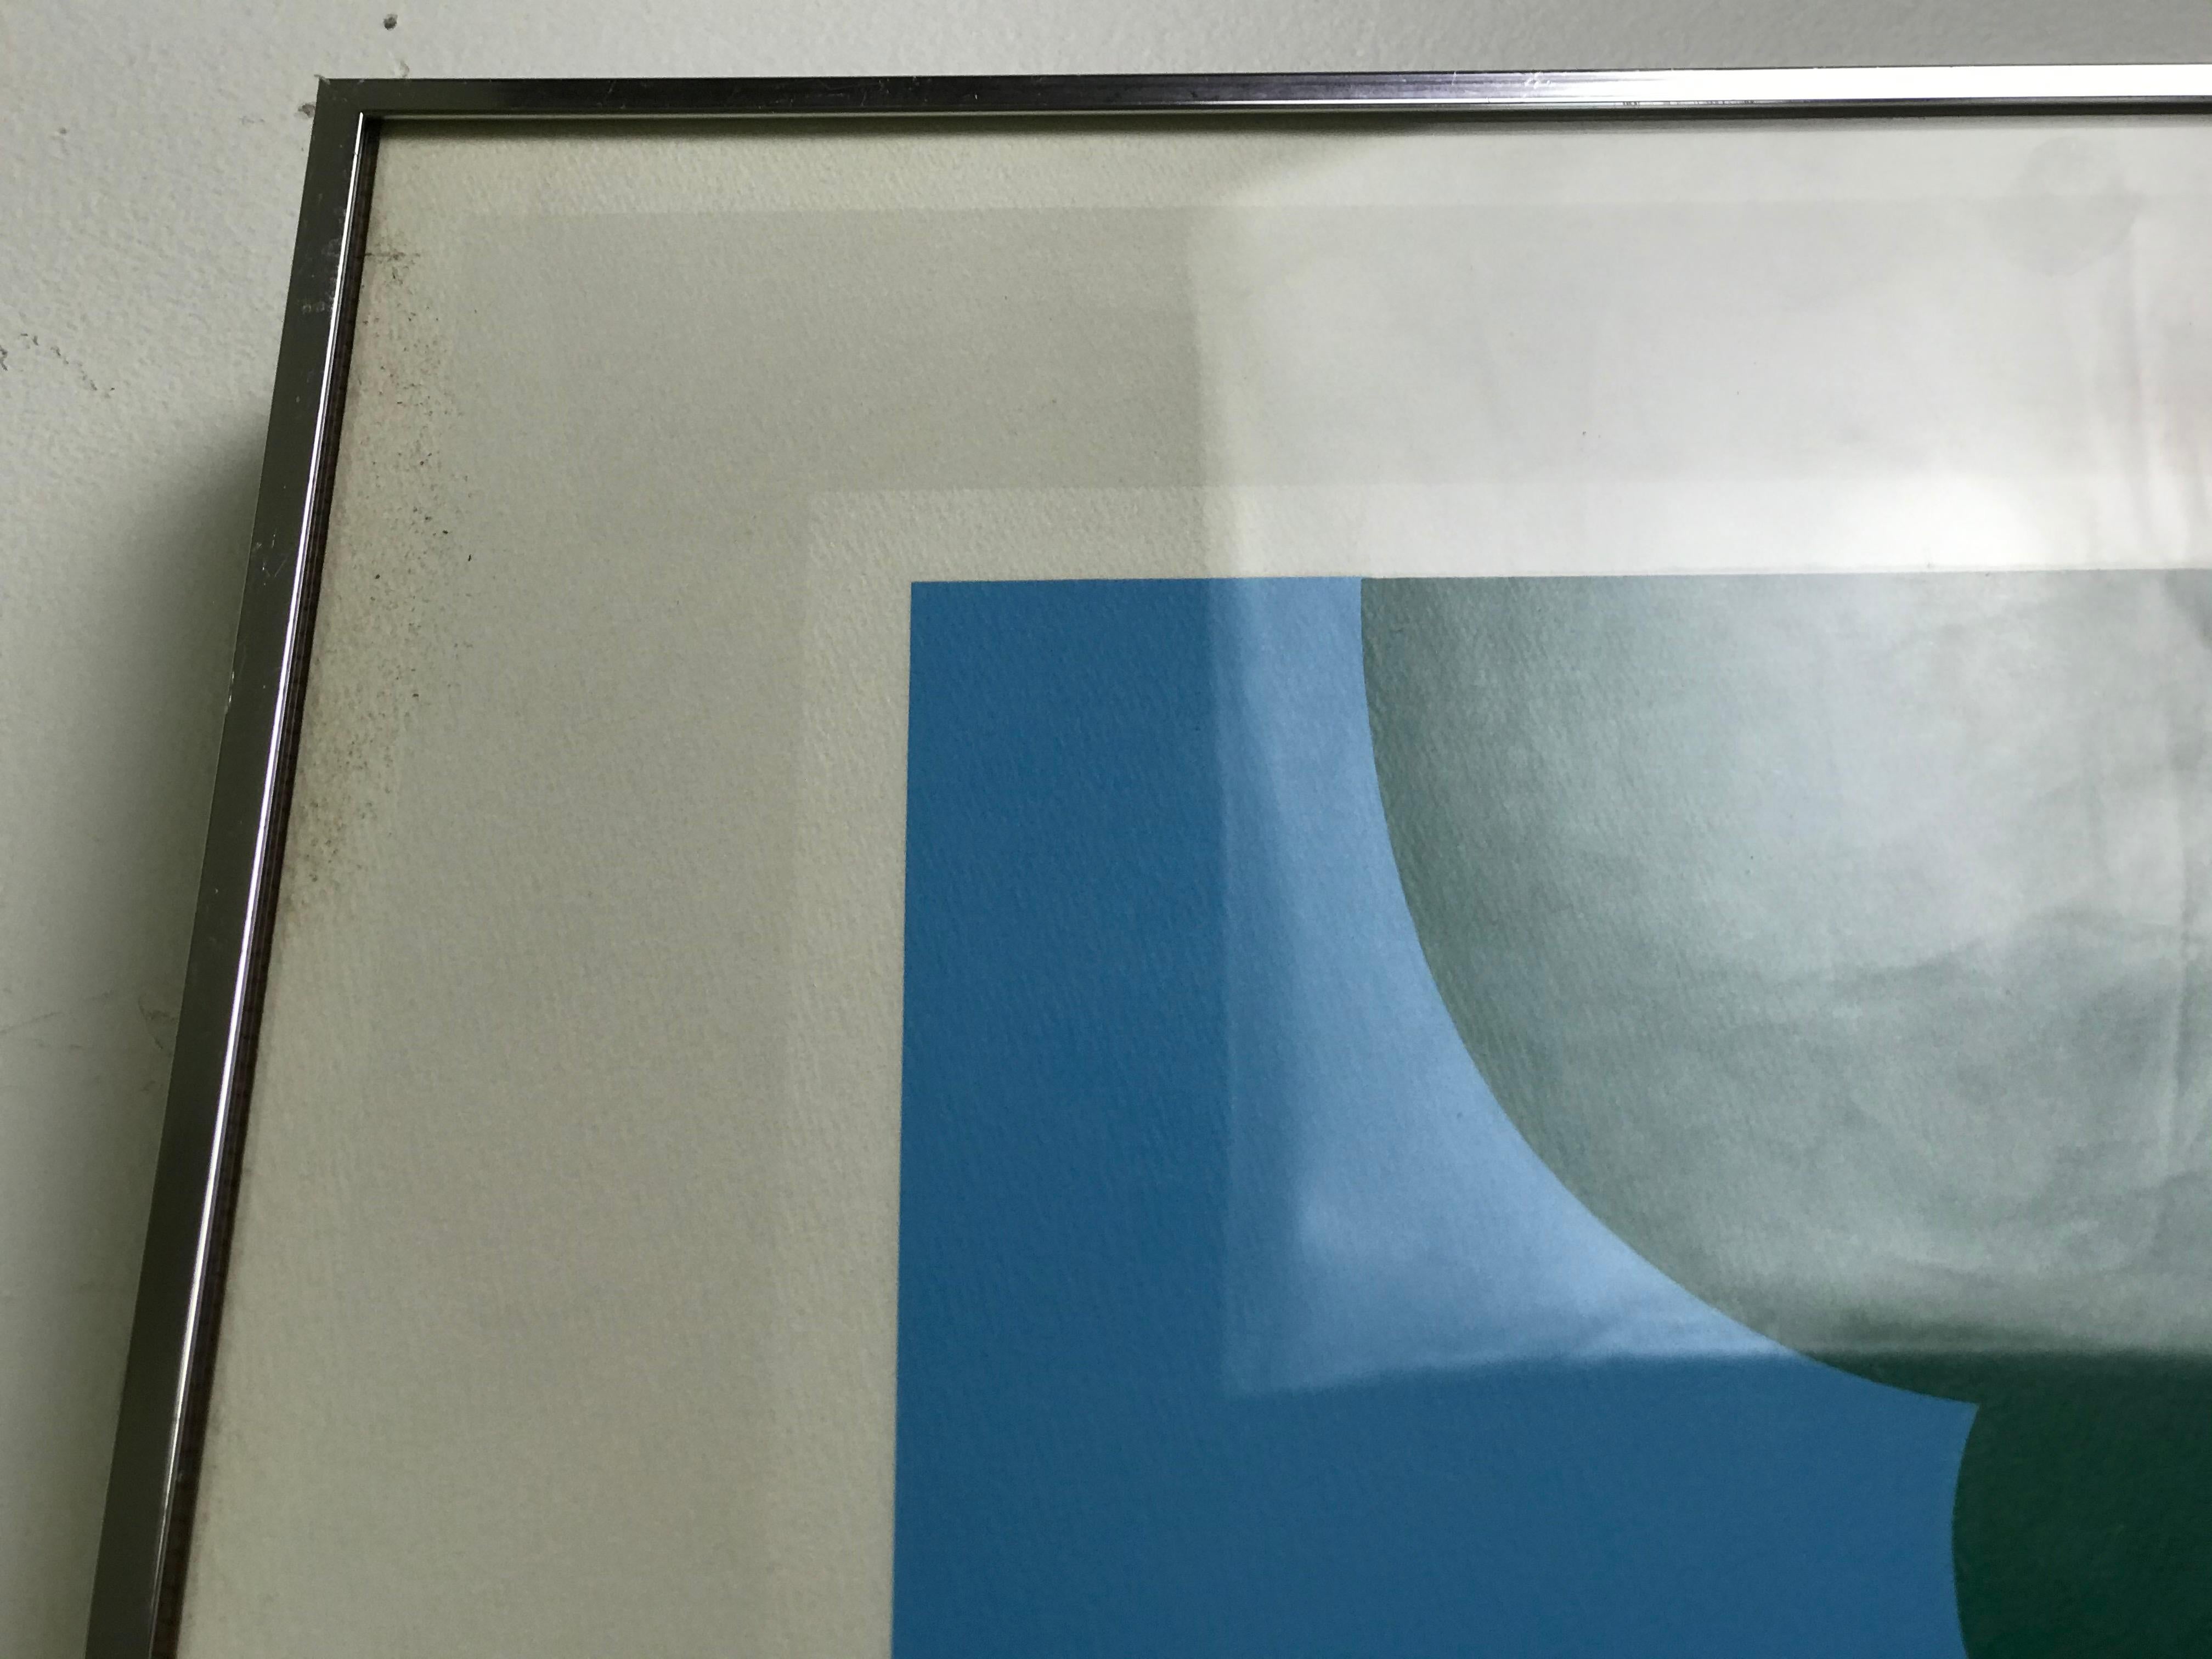 Late 20th Century Signed and Numbered Minimalist Postmodern Serigraph by Ole Kortzau The Bench 